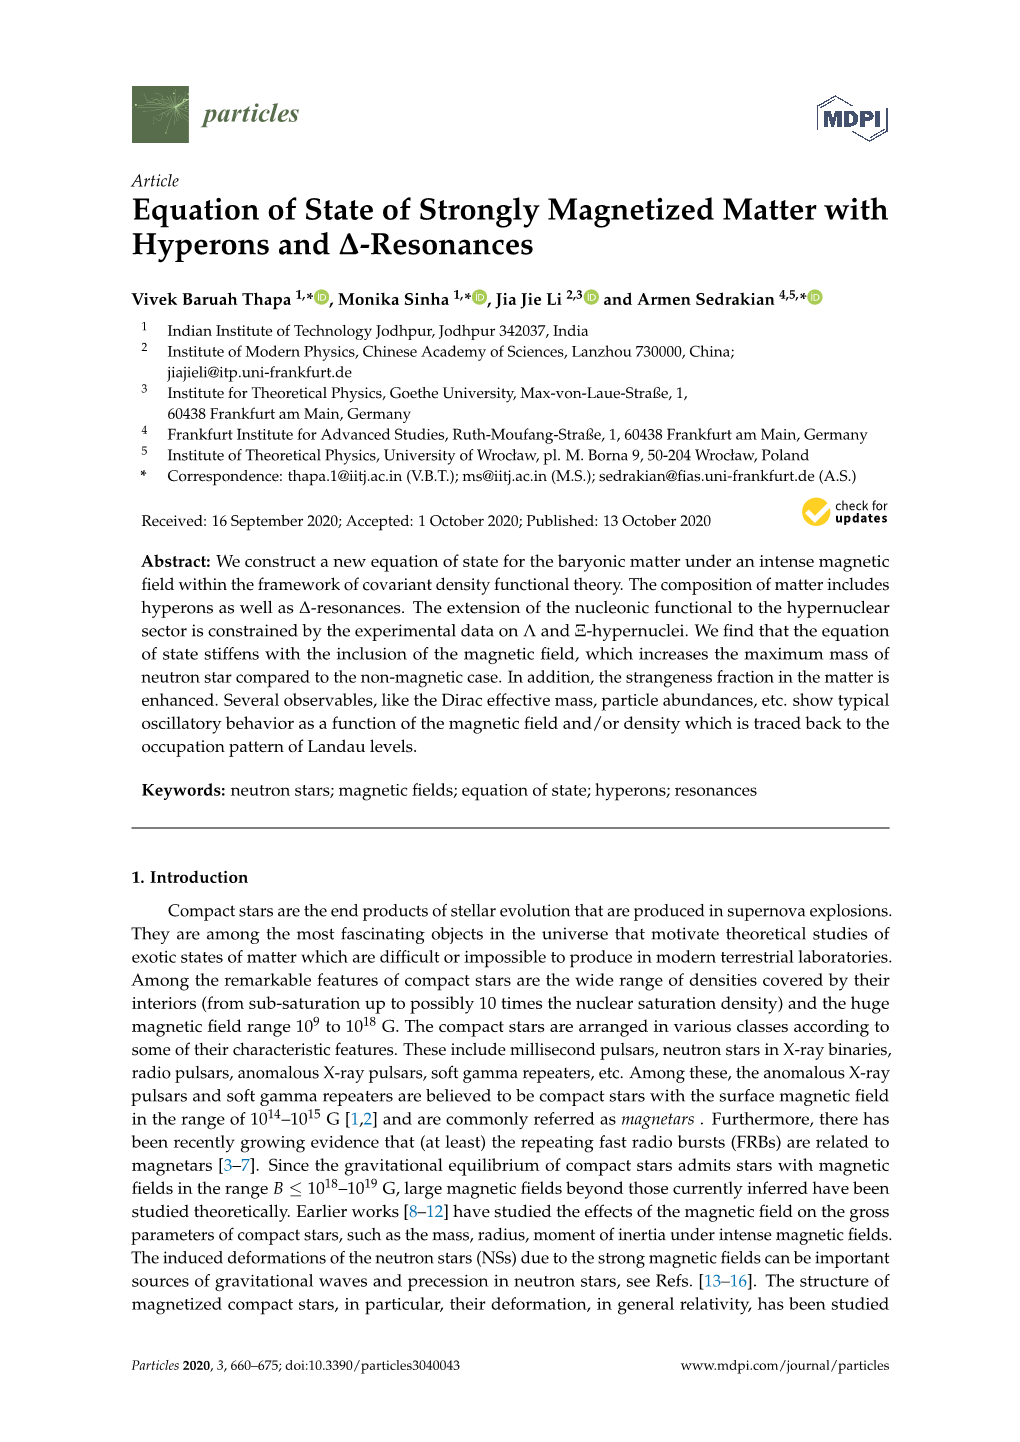 Equation of State of Strongly Magnetized Matter with Hyperons and ∆-Resonances